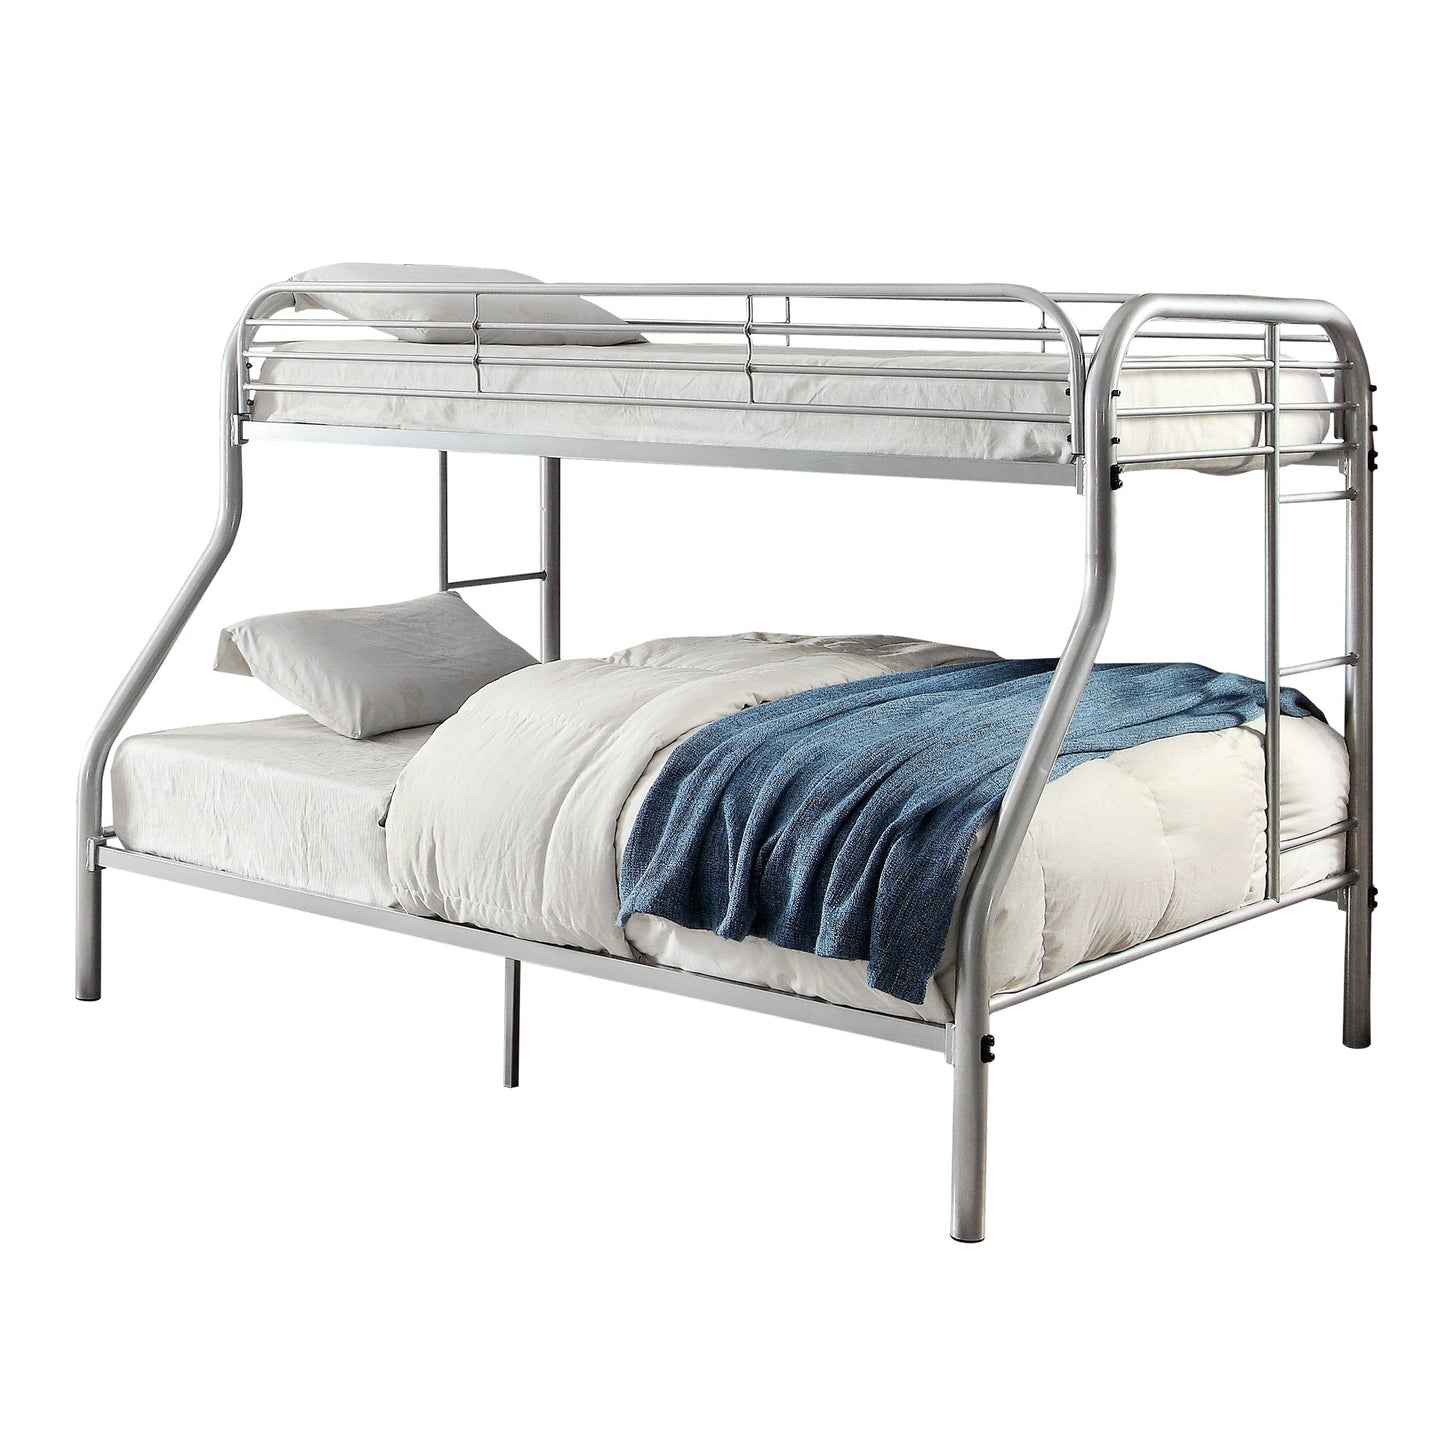 Teledona Transitional Metal Twin over Full Bunk Bed in Silver